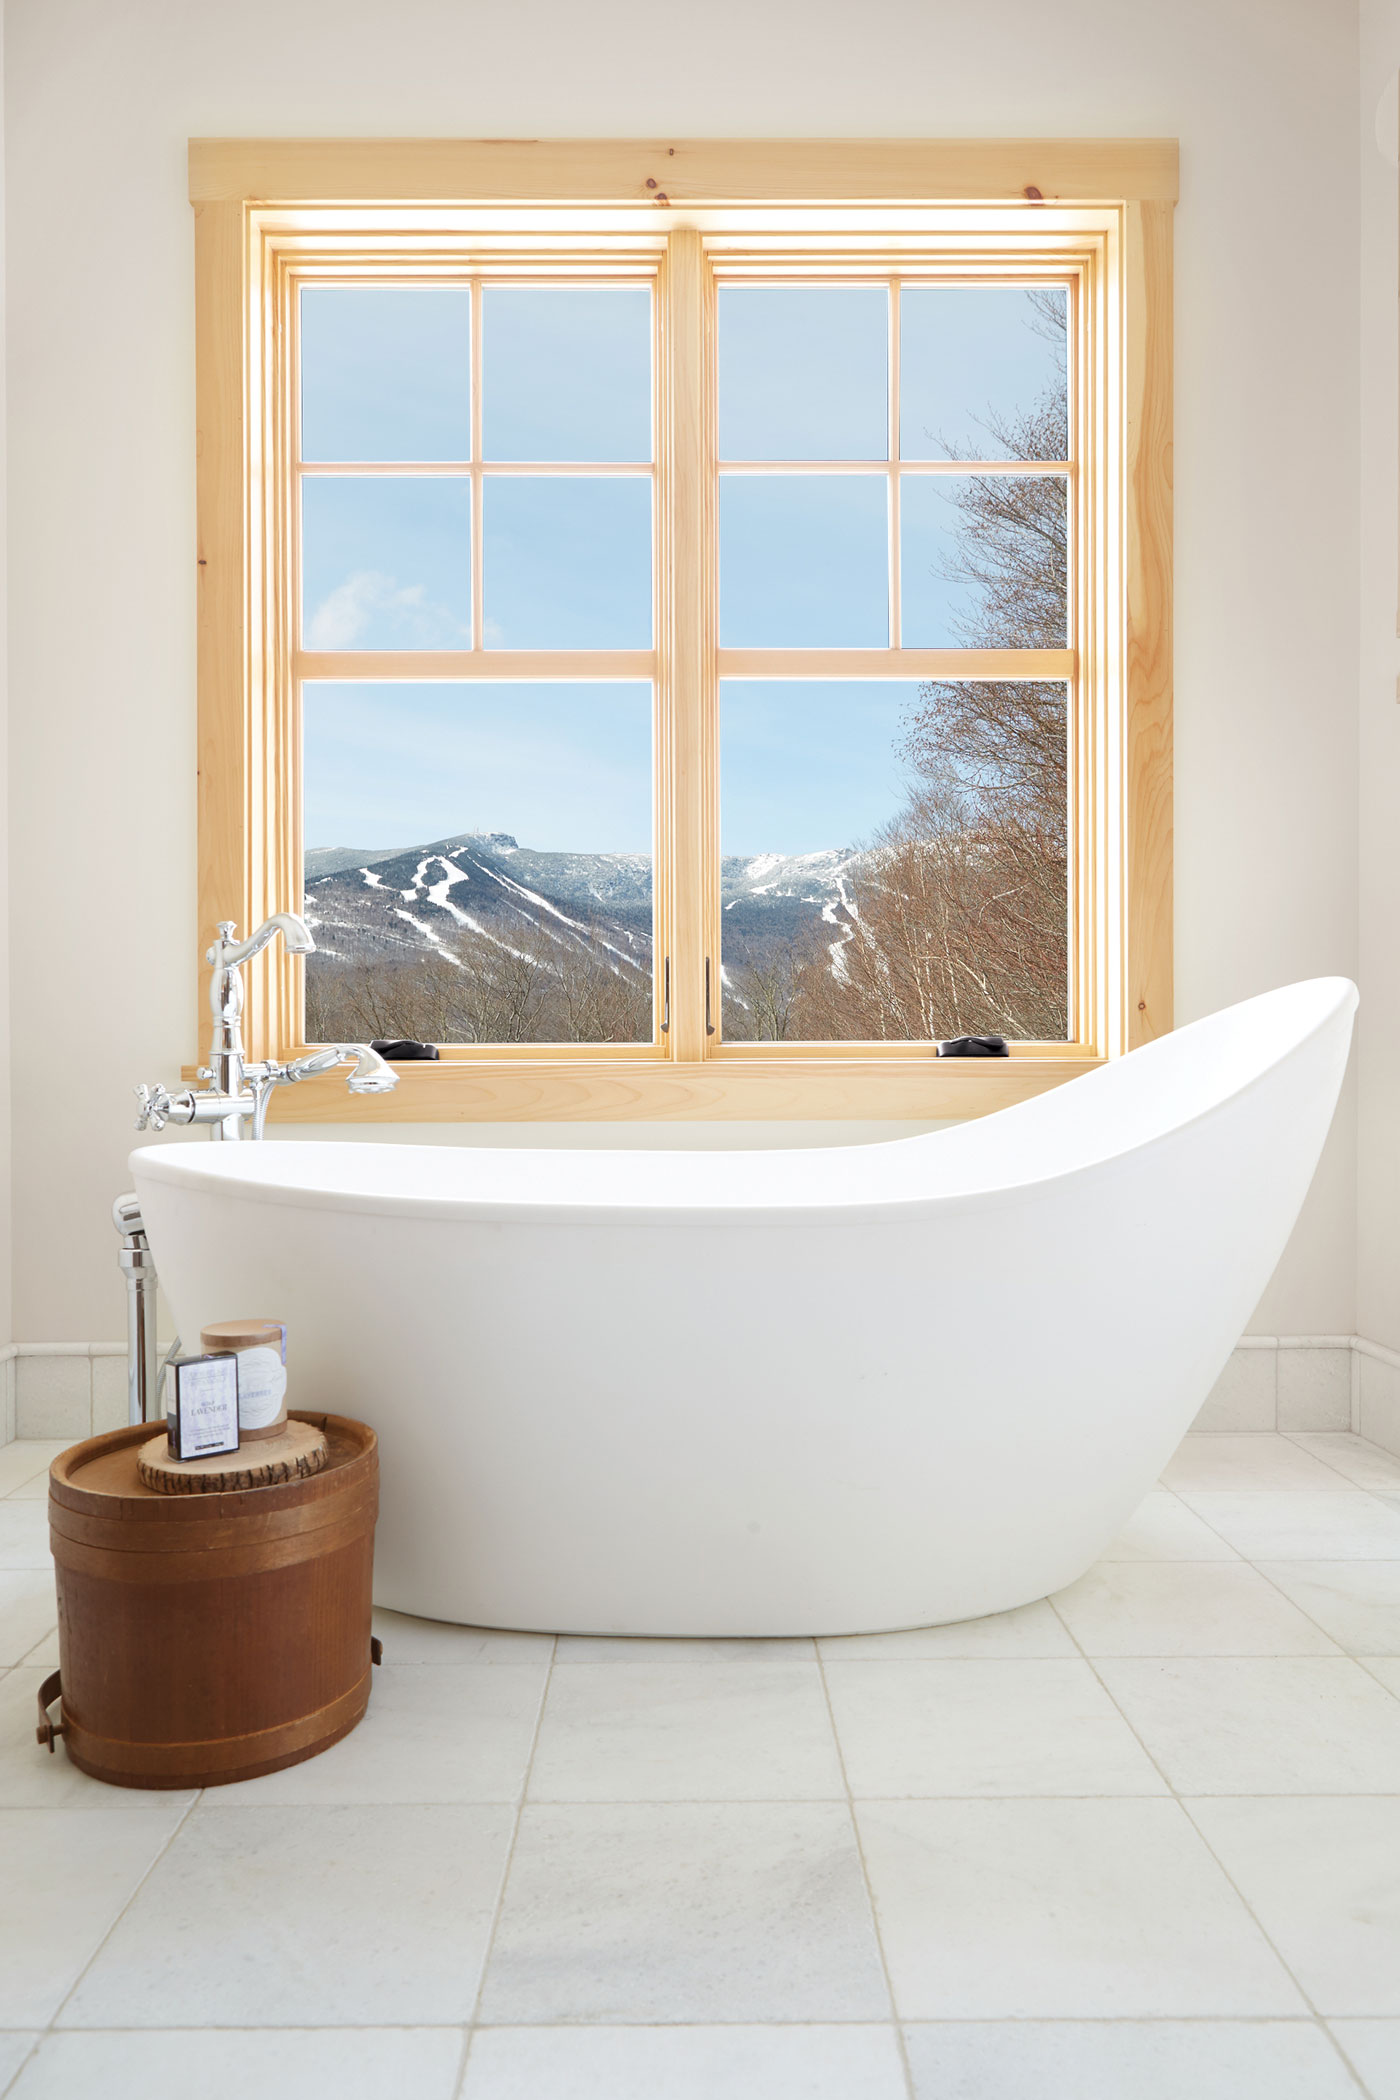 A large bathtub sits below two large double-hung windows